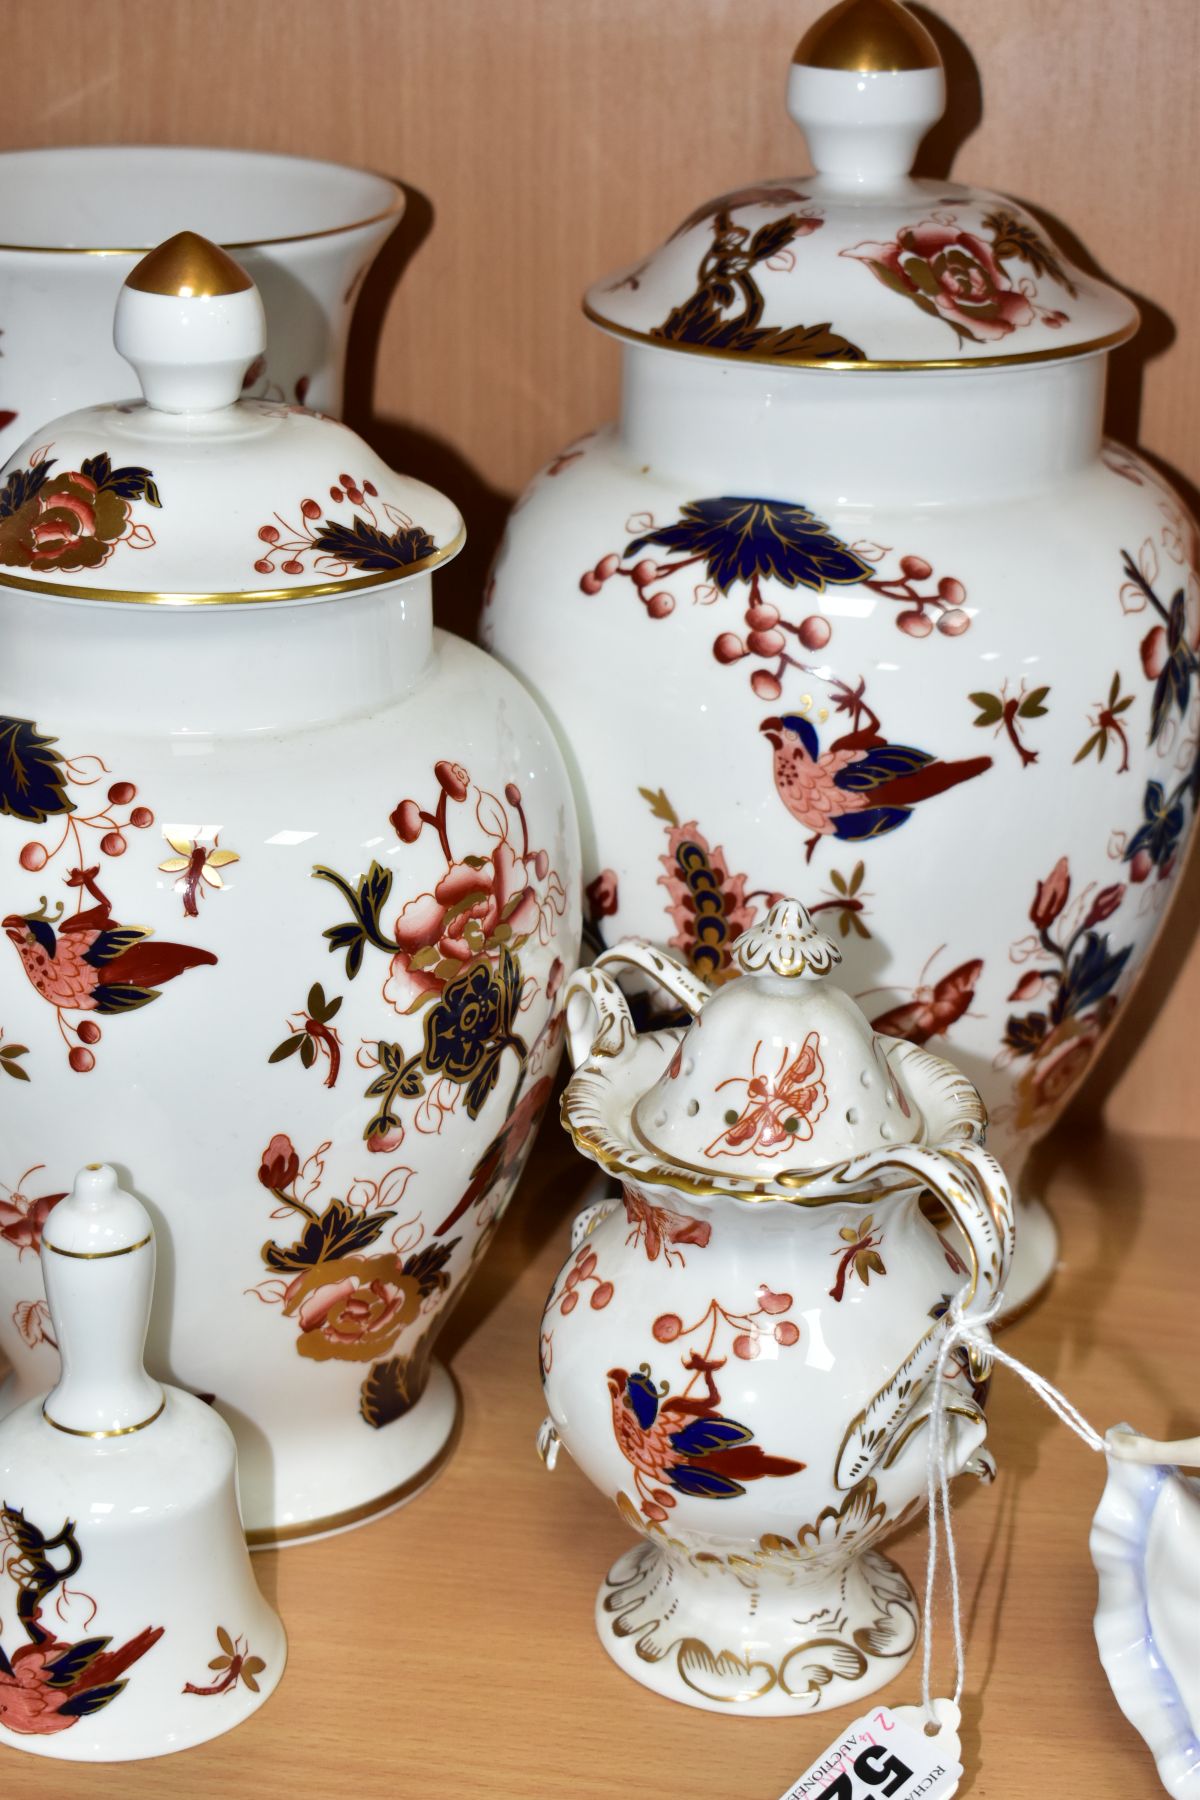 SIX PIECES OF COALPORT HONG KONG CERAMIC WARES, comprising two covered vases heights approximately - Image 4 of 8